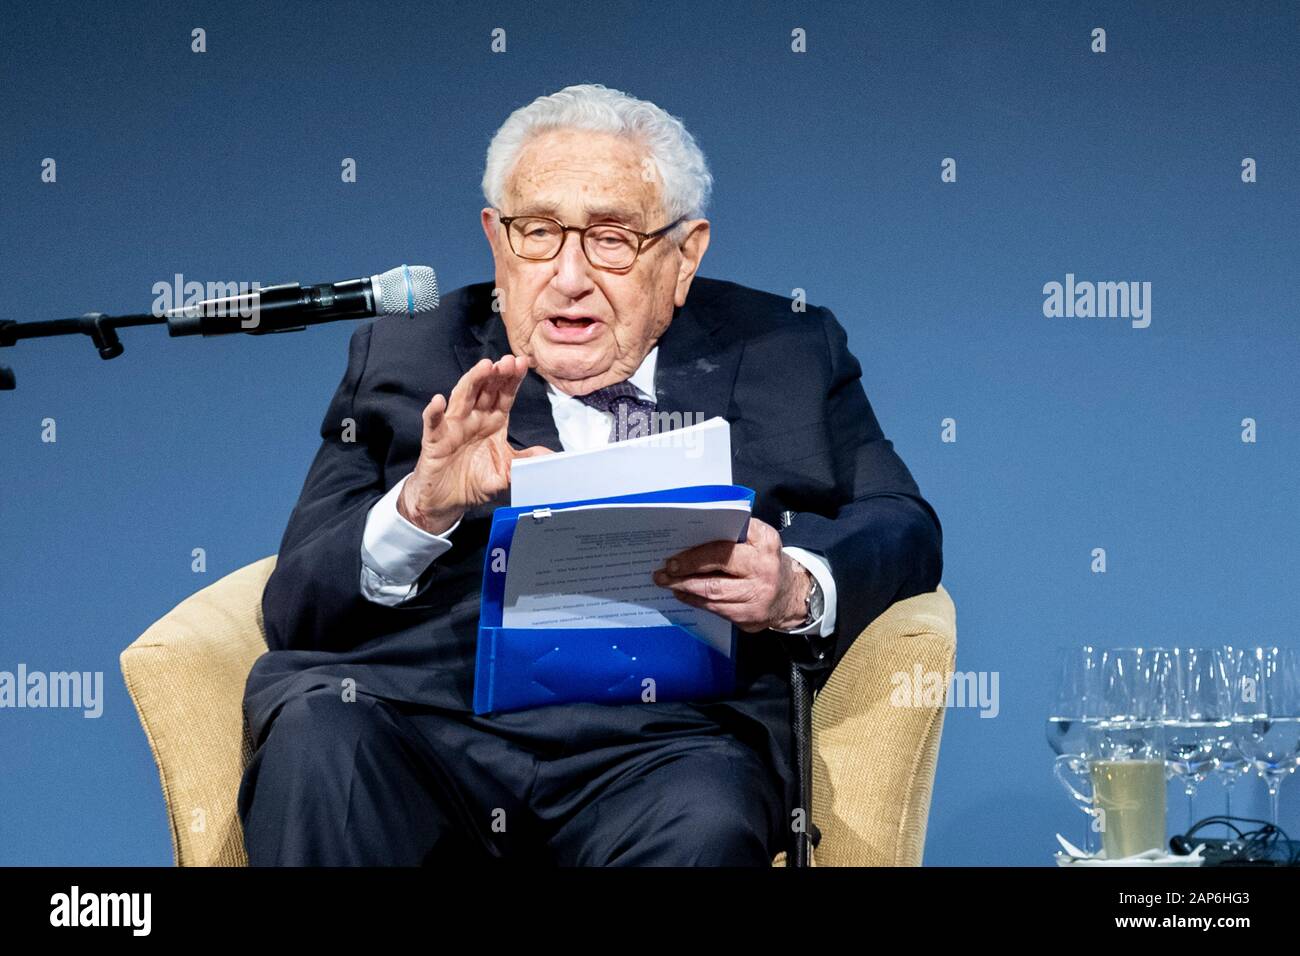 Berlin, Germany. 21st Jan, 2020. Henry A. Kissinger, former US Secretary of State, speaks at the award of the Henry A. Kissinger Prize to the German Chancellor. The prize is awarded annually by the American Academy in Berlin to a renowned personality from the field of international diplomacy. Credit: Christoph Soeder/dpa/Alamy Live News Stock Photo